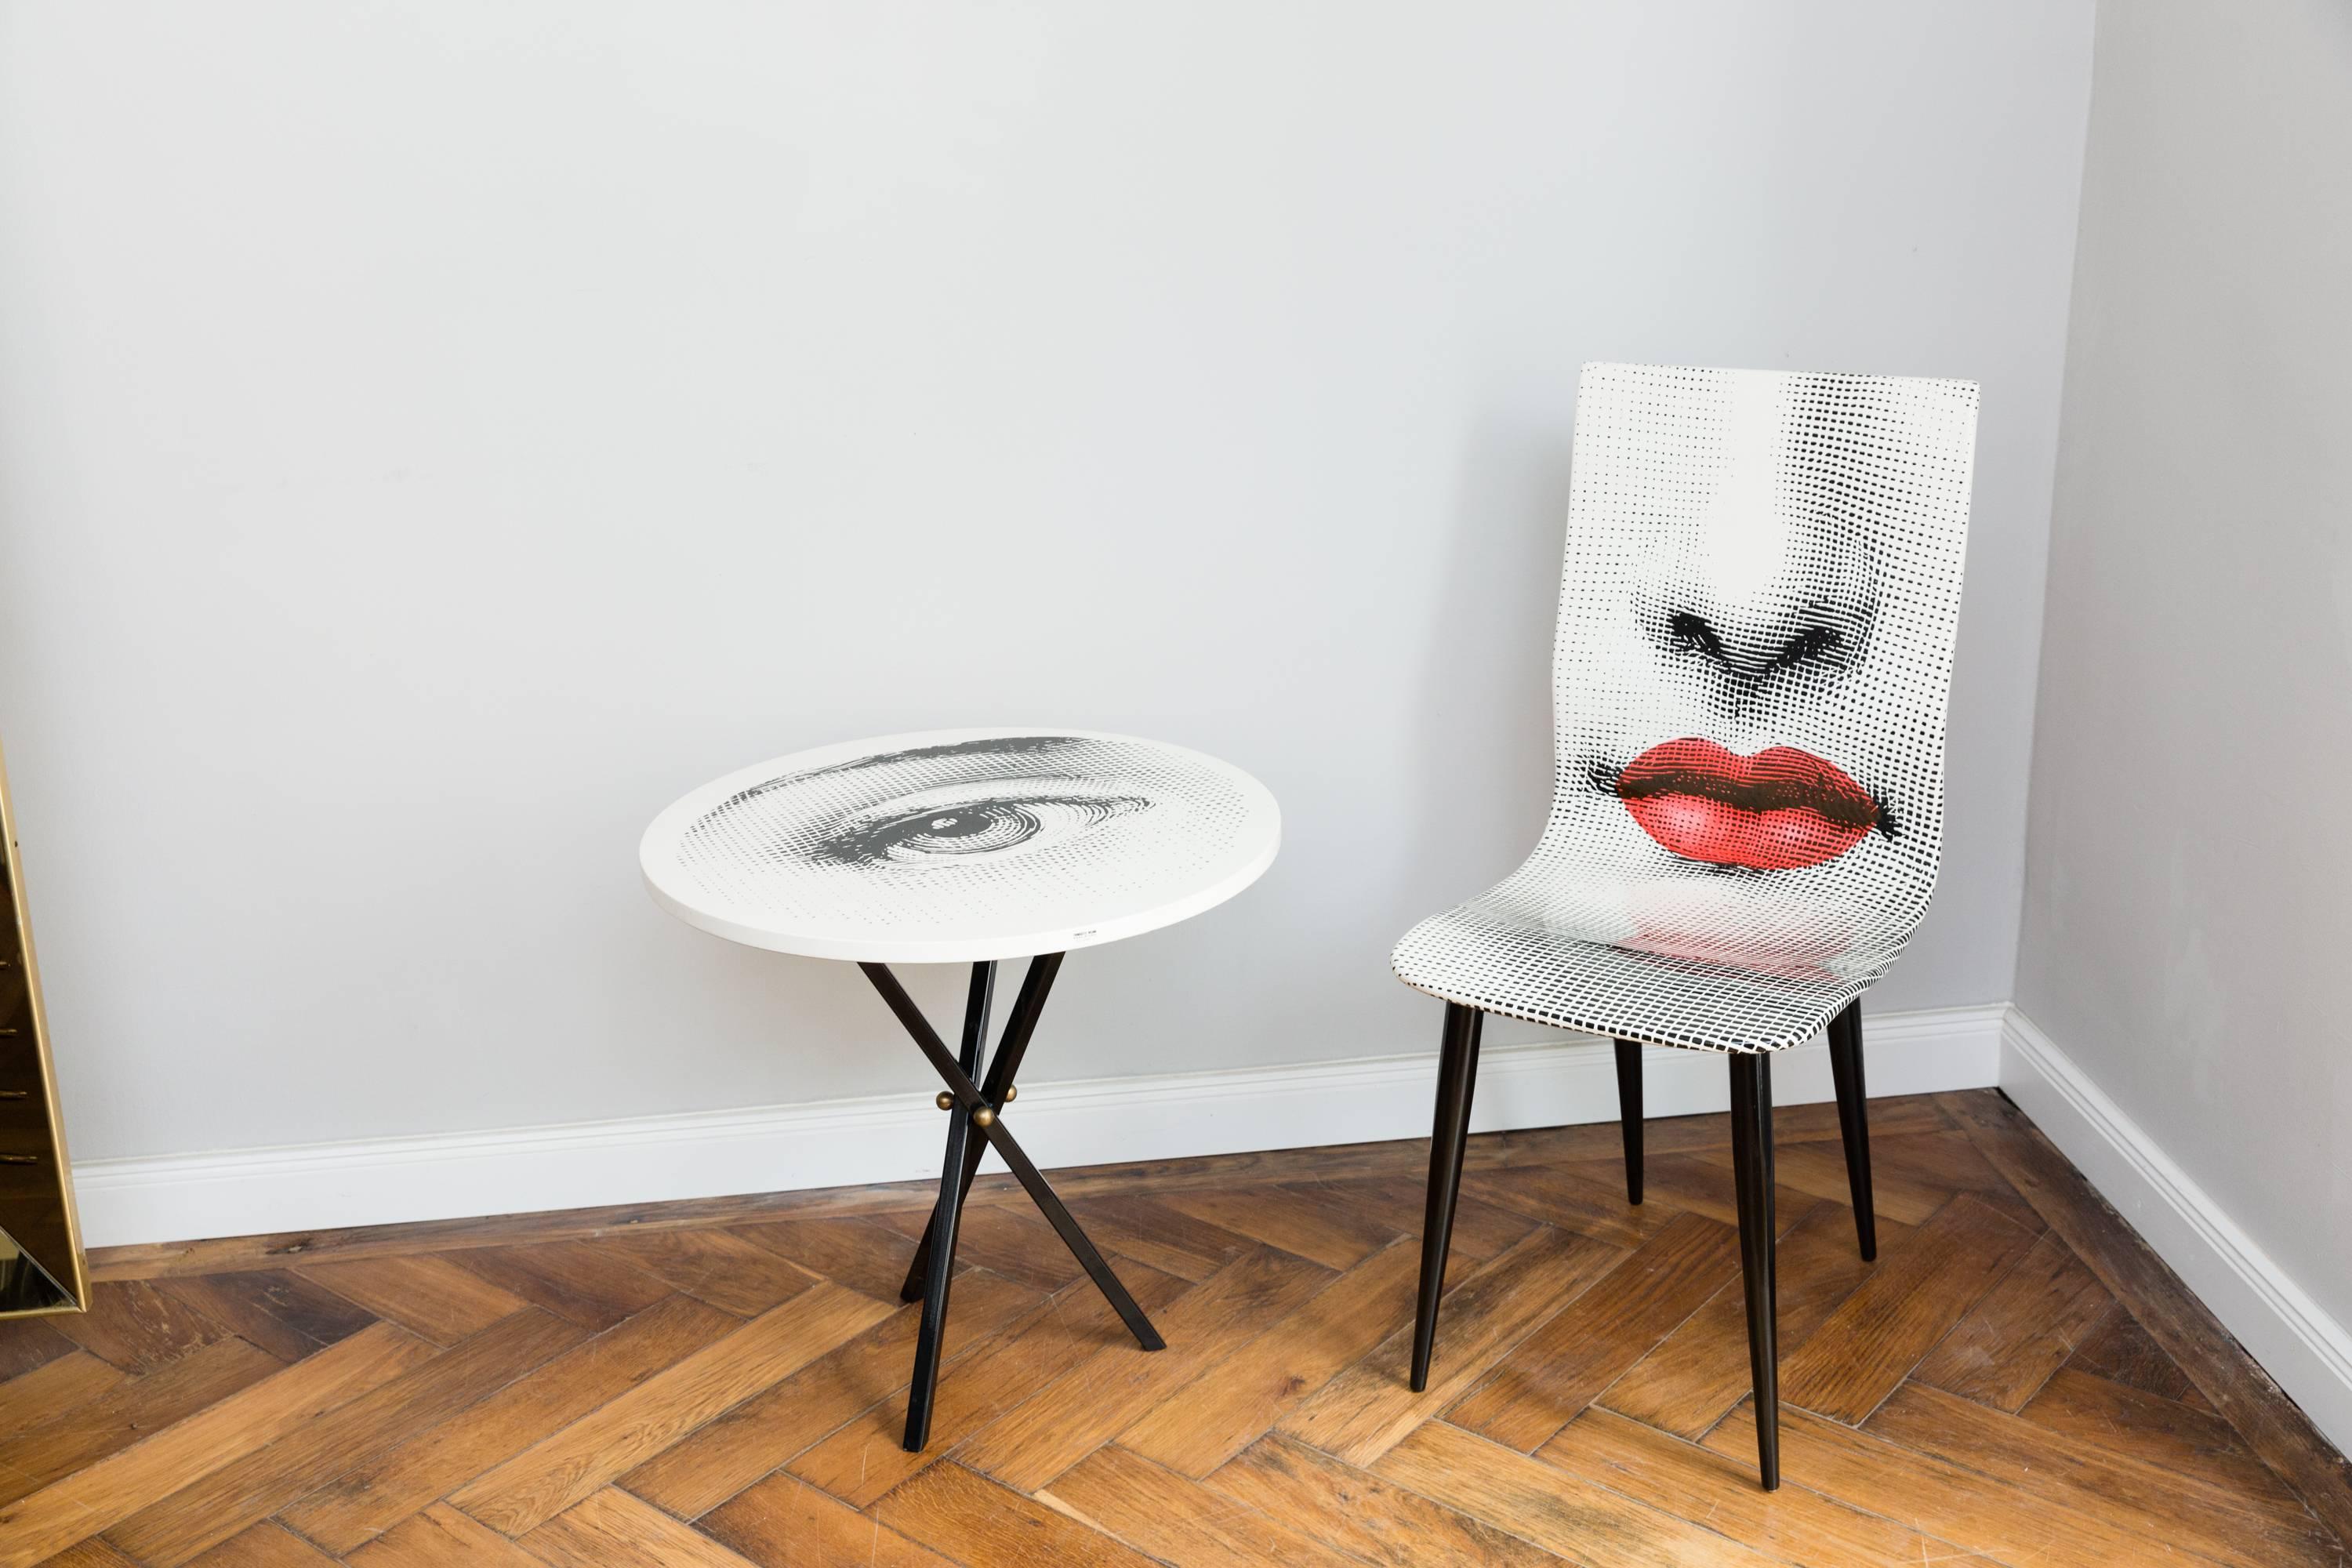 Pierro Fornasetti Bocca chair, hand-painted, two faces (nose and red mouth) front and backside, signed with the label on the bottom of the chair and on the backside, N.1/2006, Fornasetti, Milano, Made in Italy. Very good condition, no scratches of